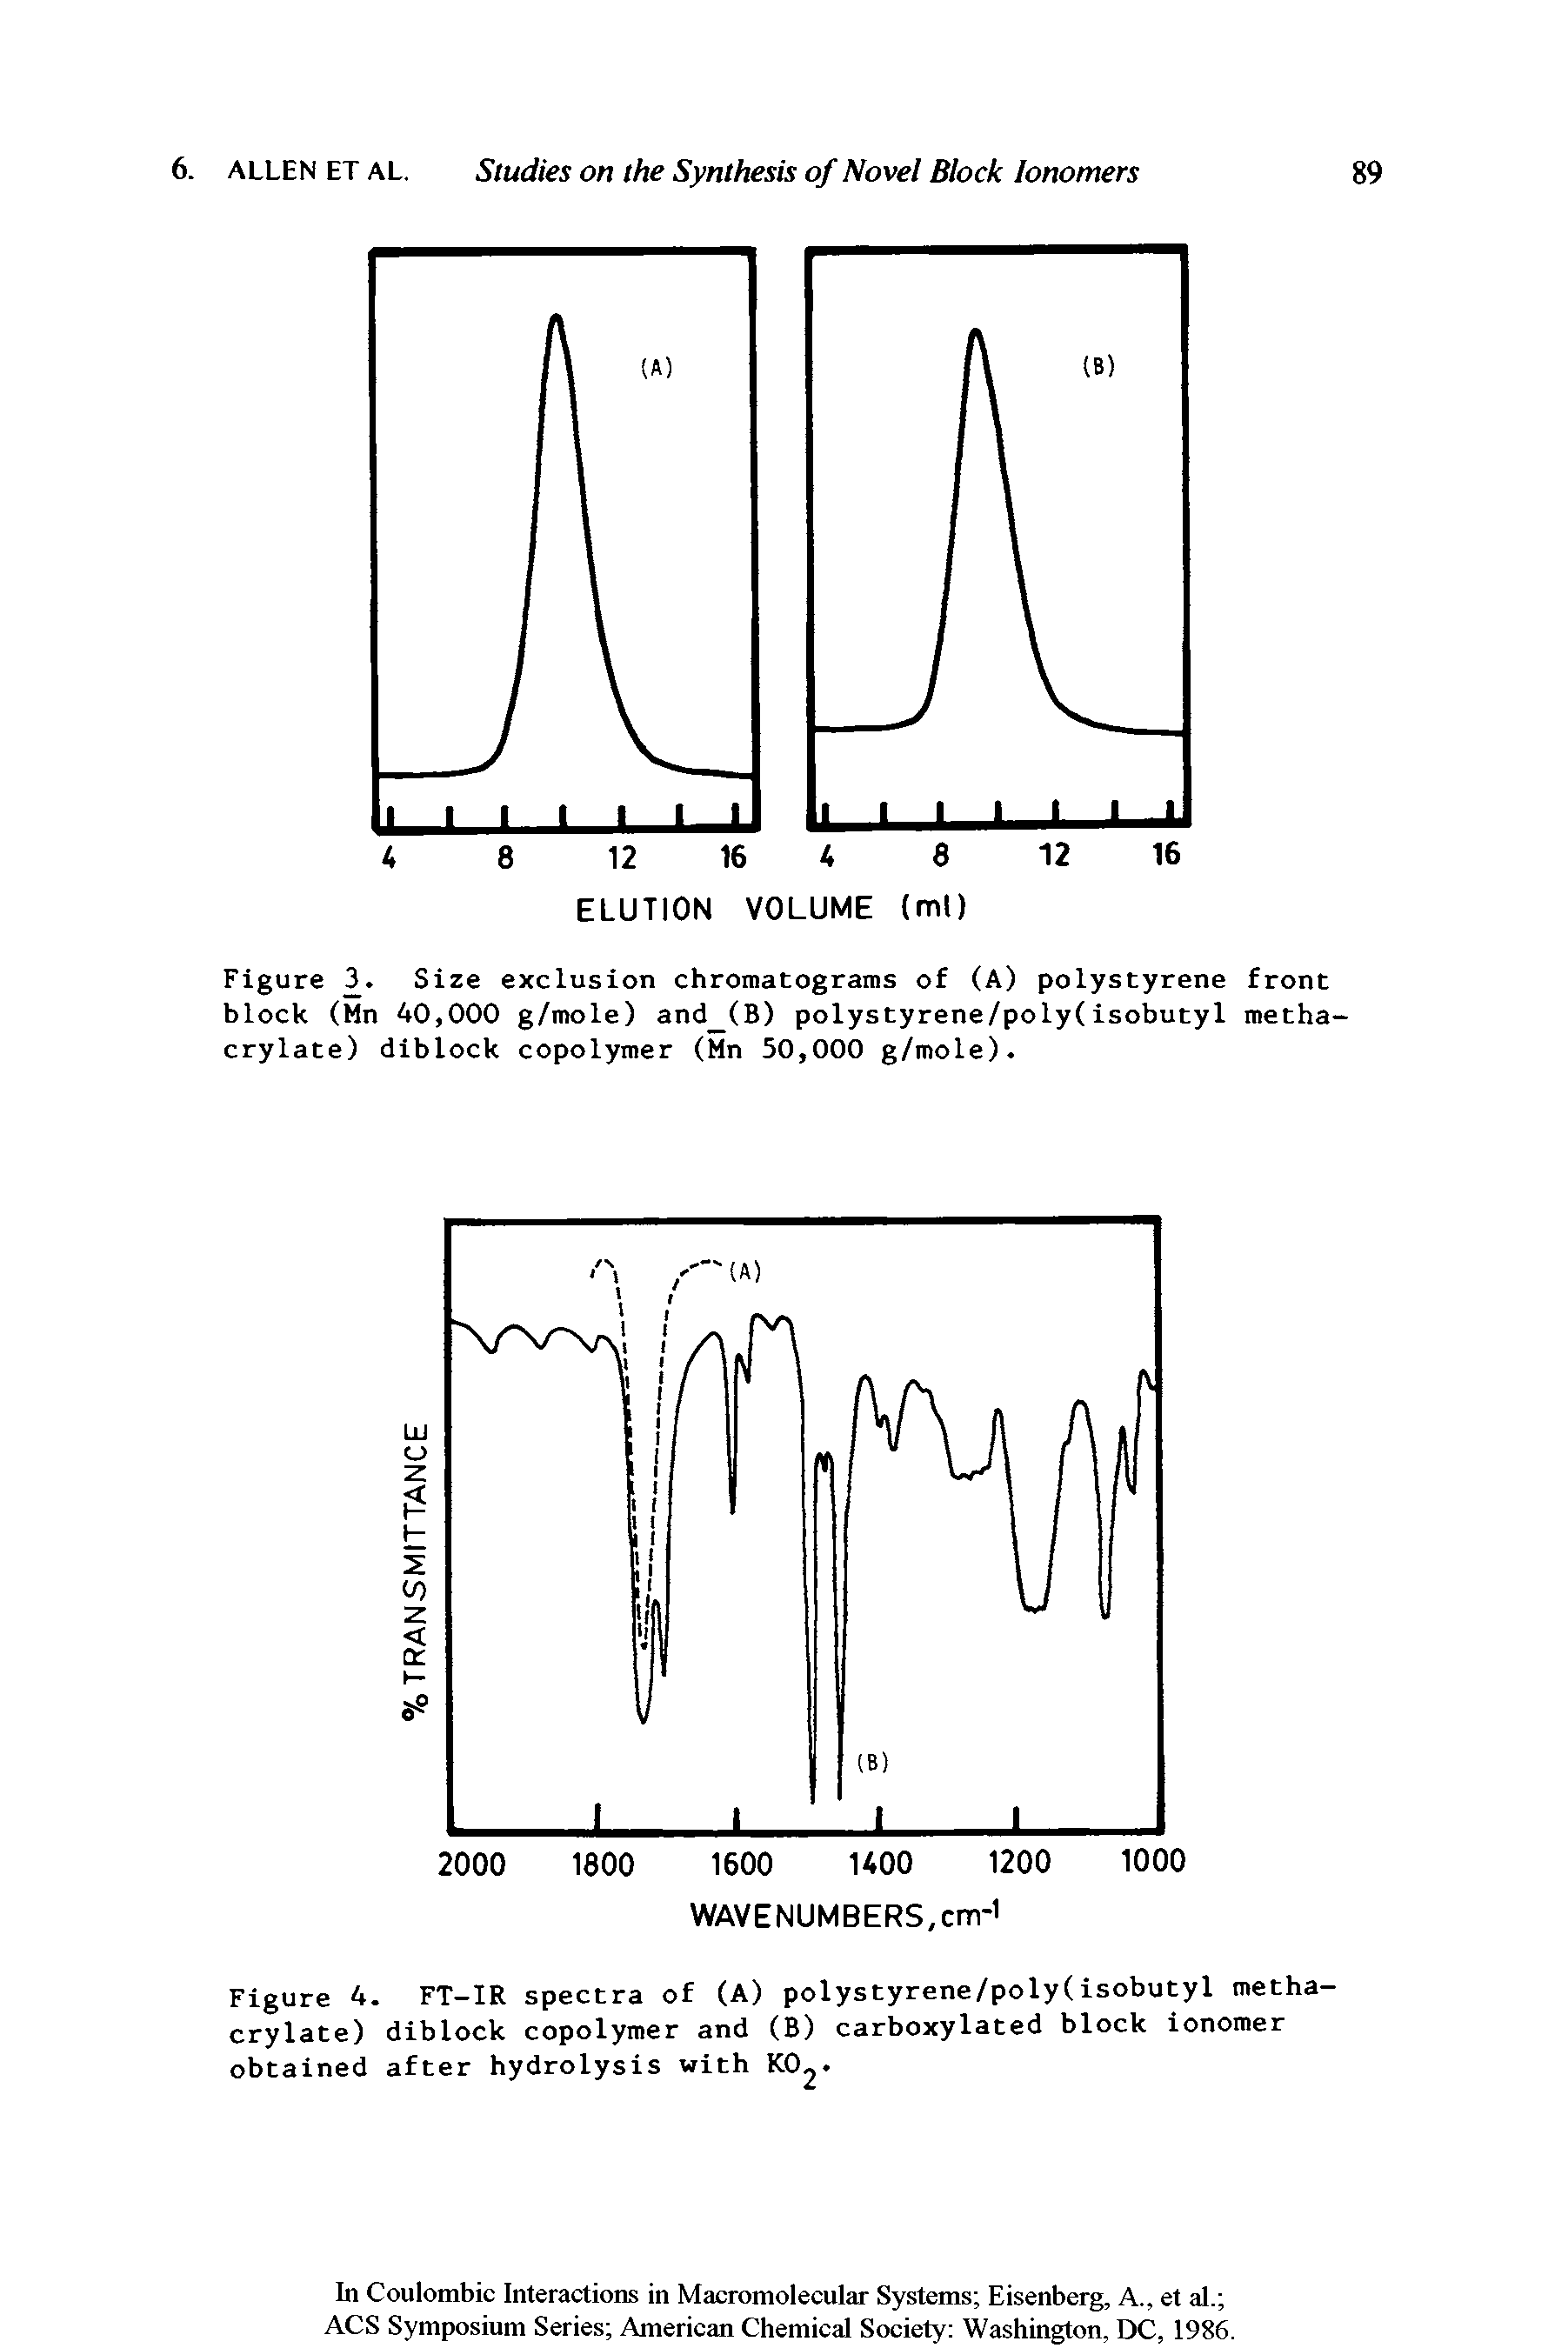 Figure 3. Size exclusion chromatograms of (A) polystyrene front block (Mn 40,000 g/mole) and (B) polystyrene/poly(isobutyl methacrylate) diblock copolymer (Mn 50,000 g/mole).